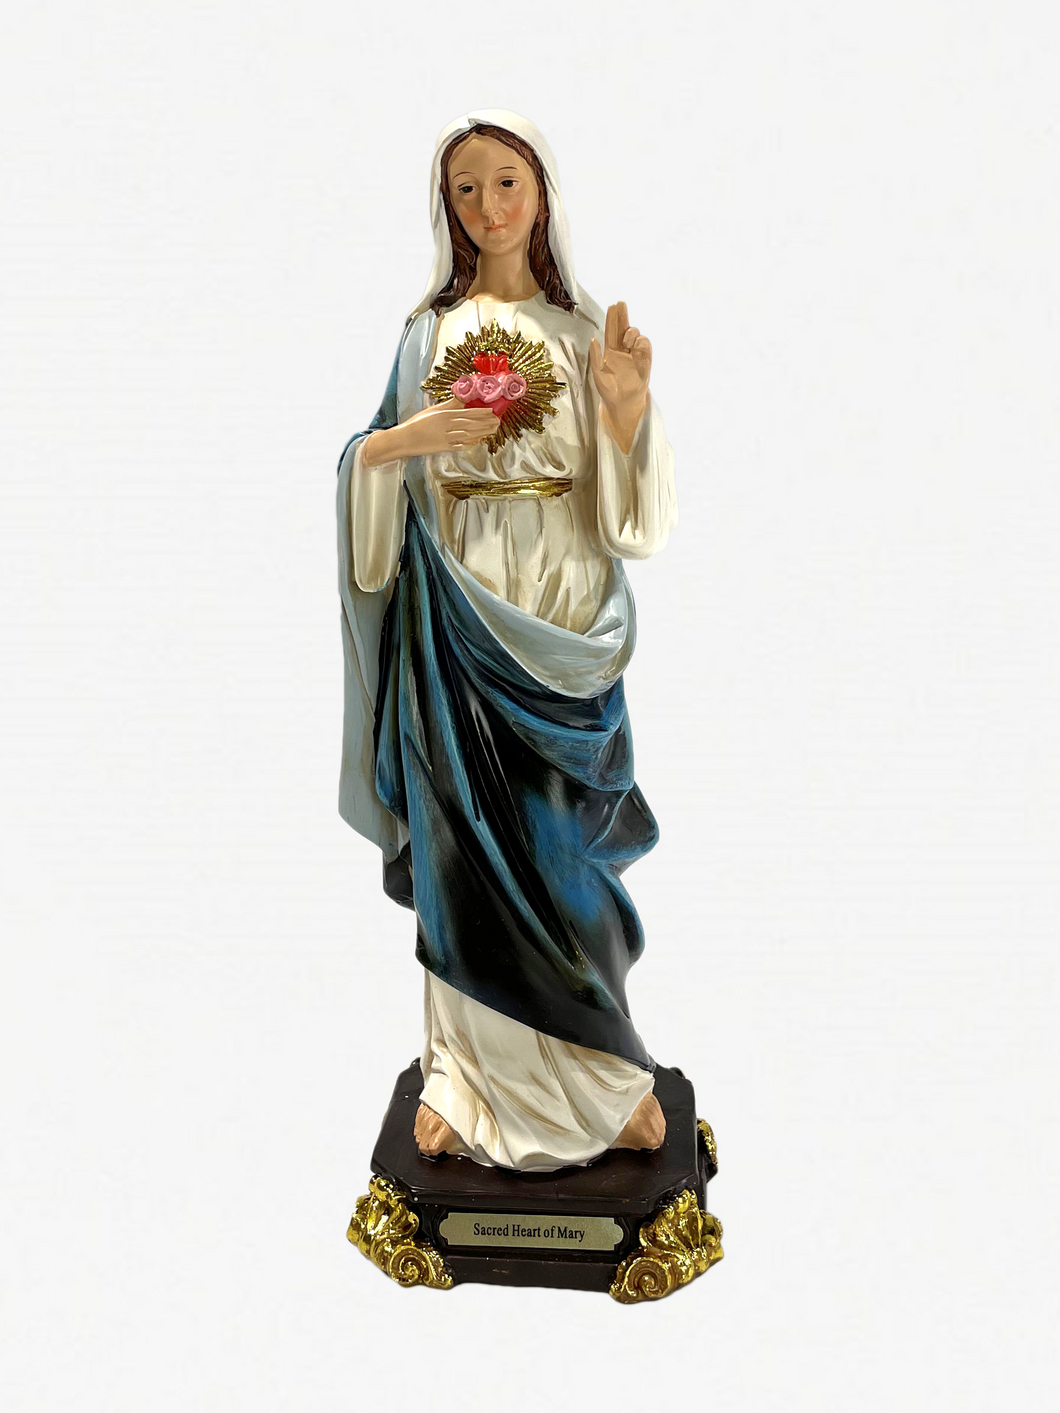 Immaculate Heart of Mary (Sacred Heart of Mary)